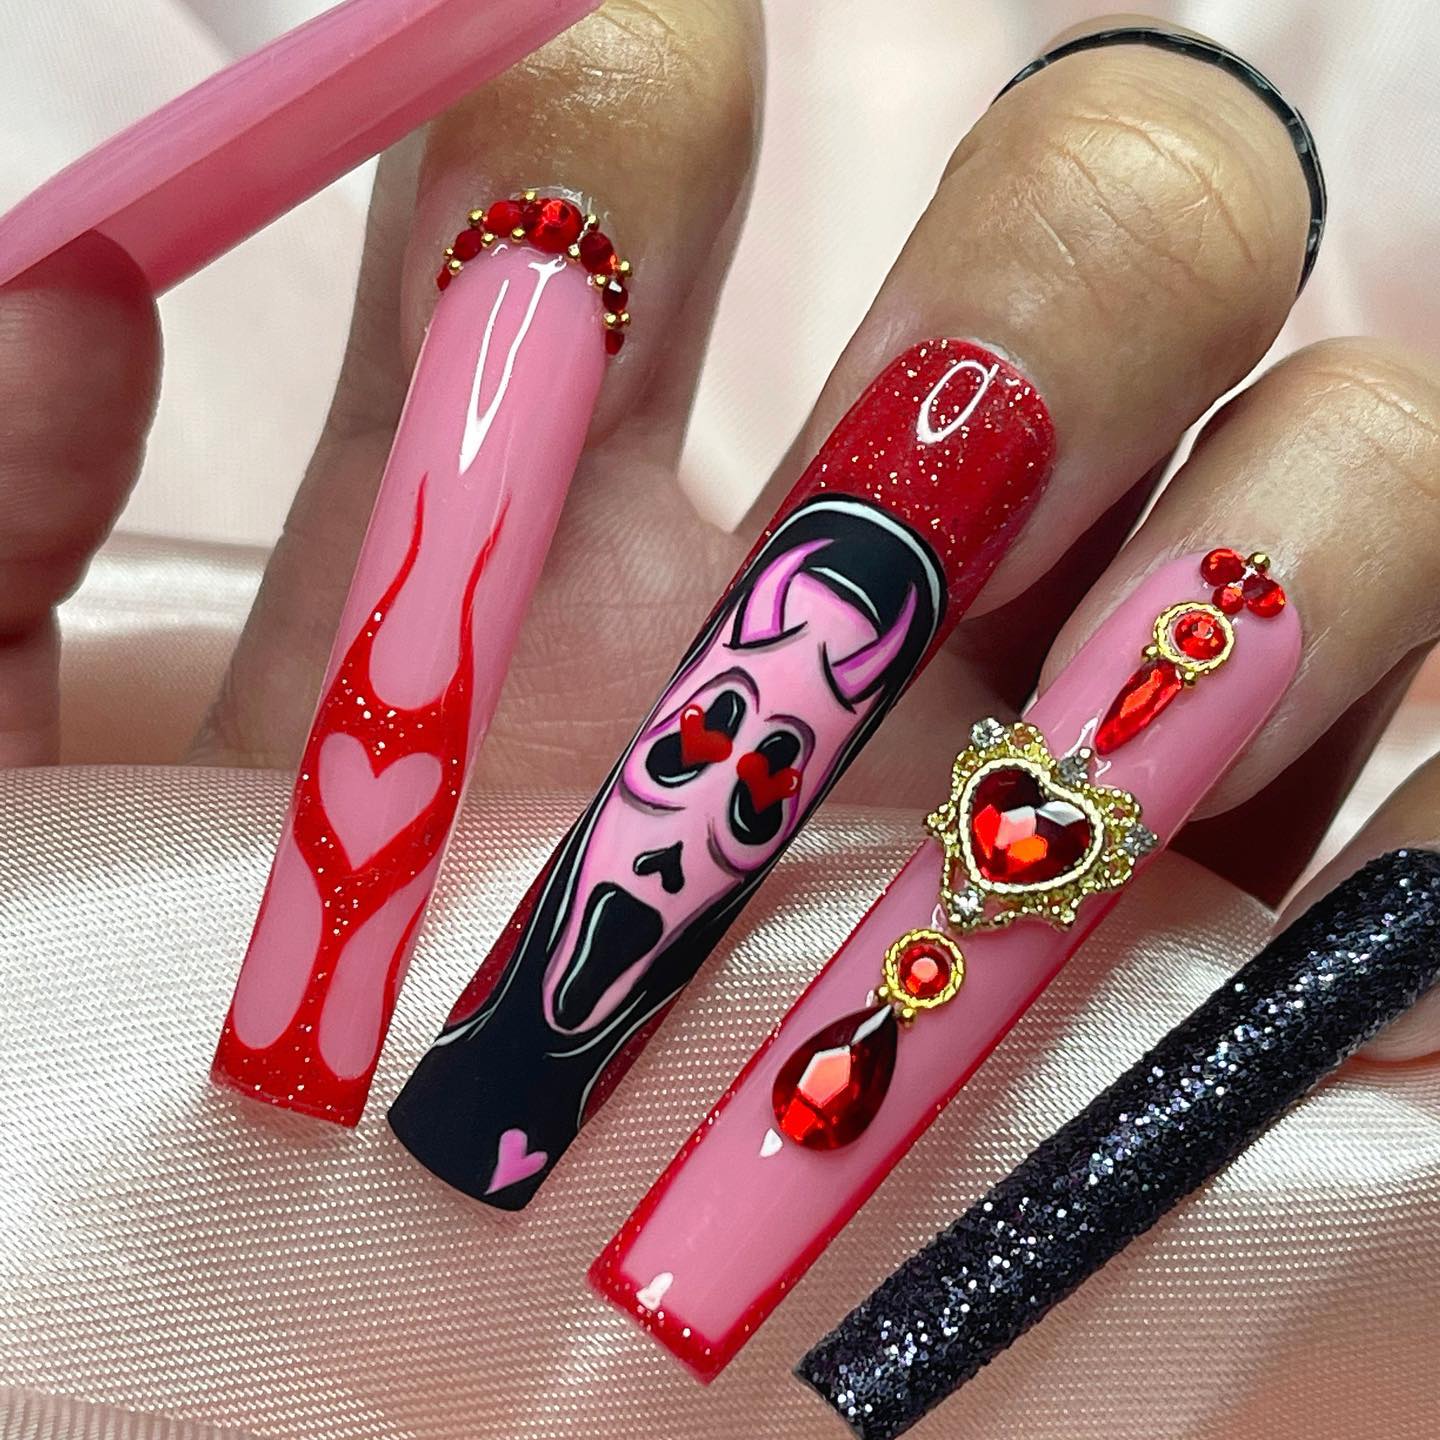 14 Lovely Valentine’s Day Manicures